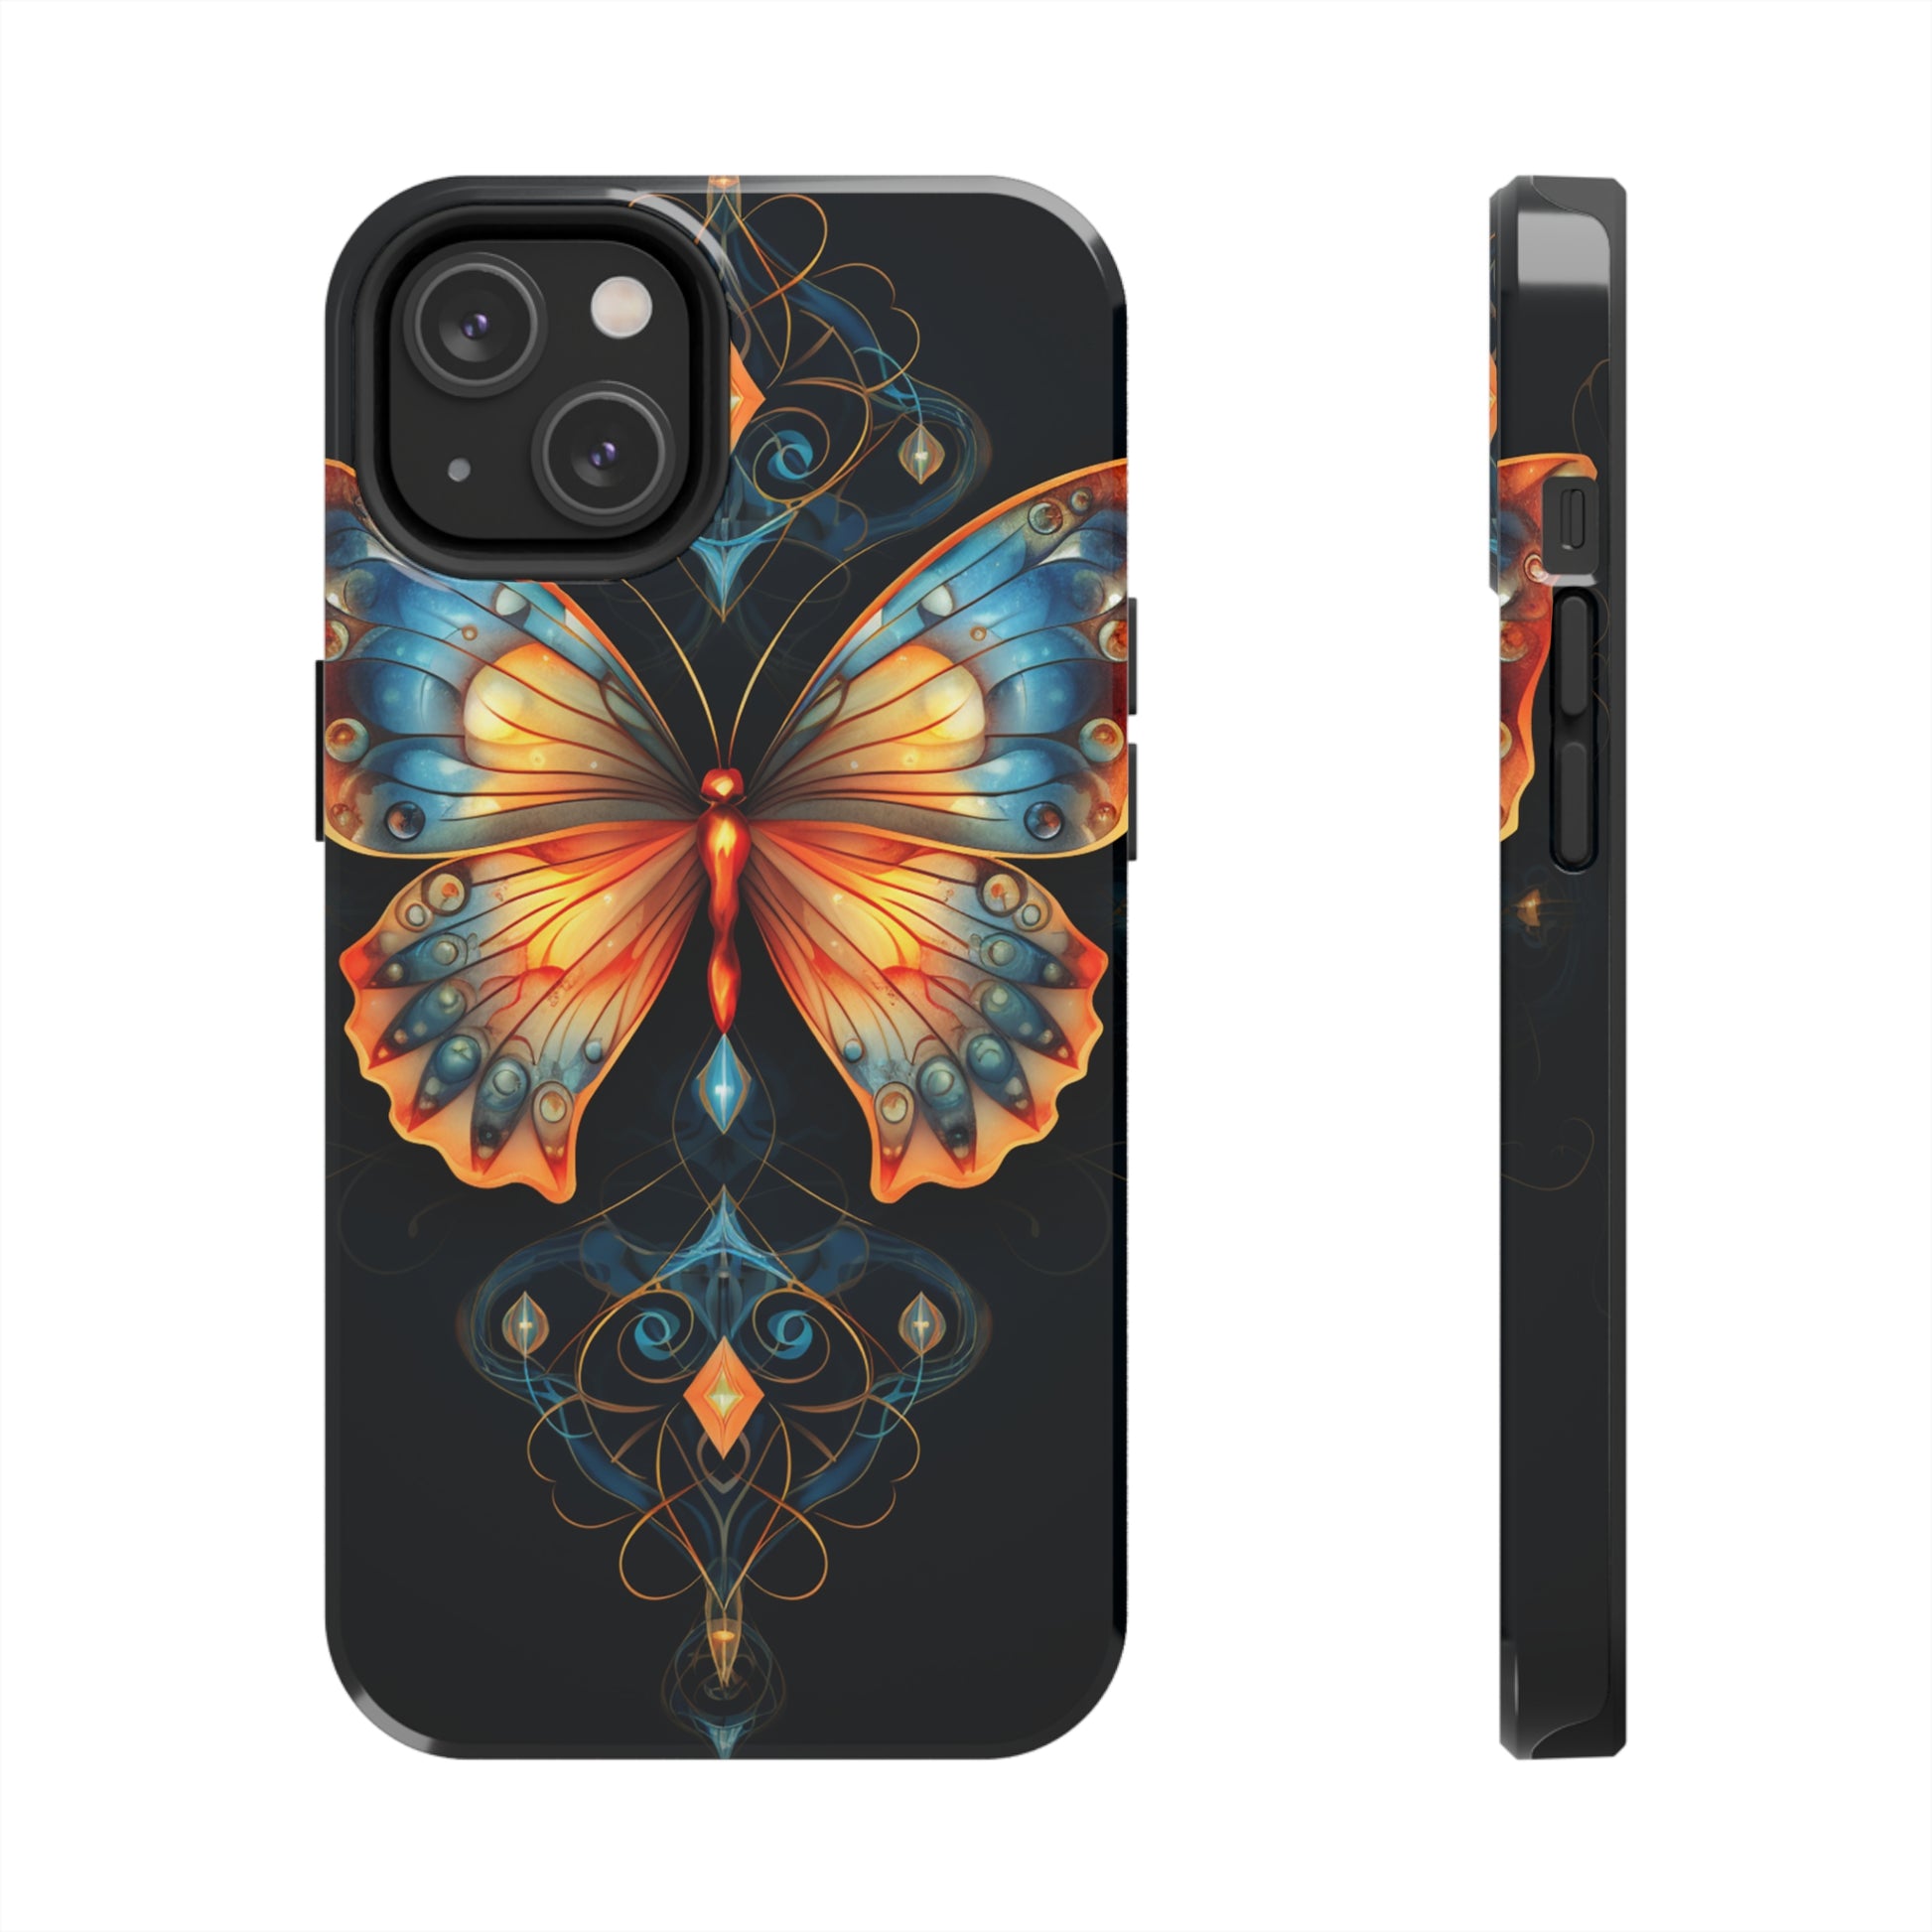 iPhone 12 Pro Max Tough Case draped in esoteric symbols and boho charm